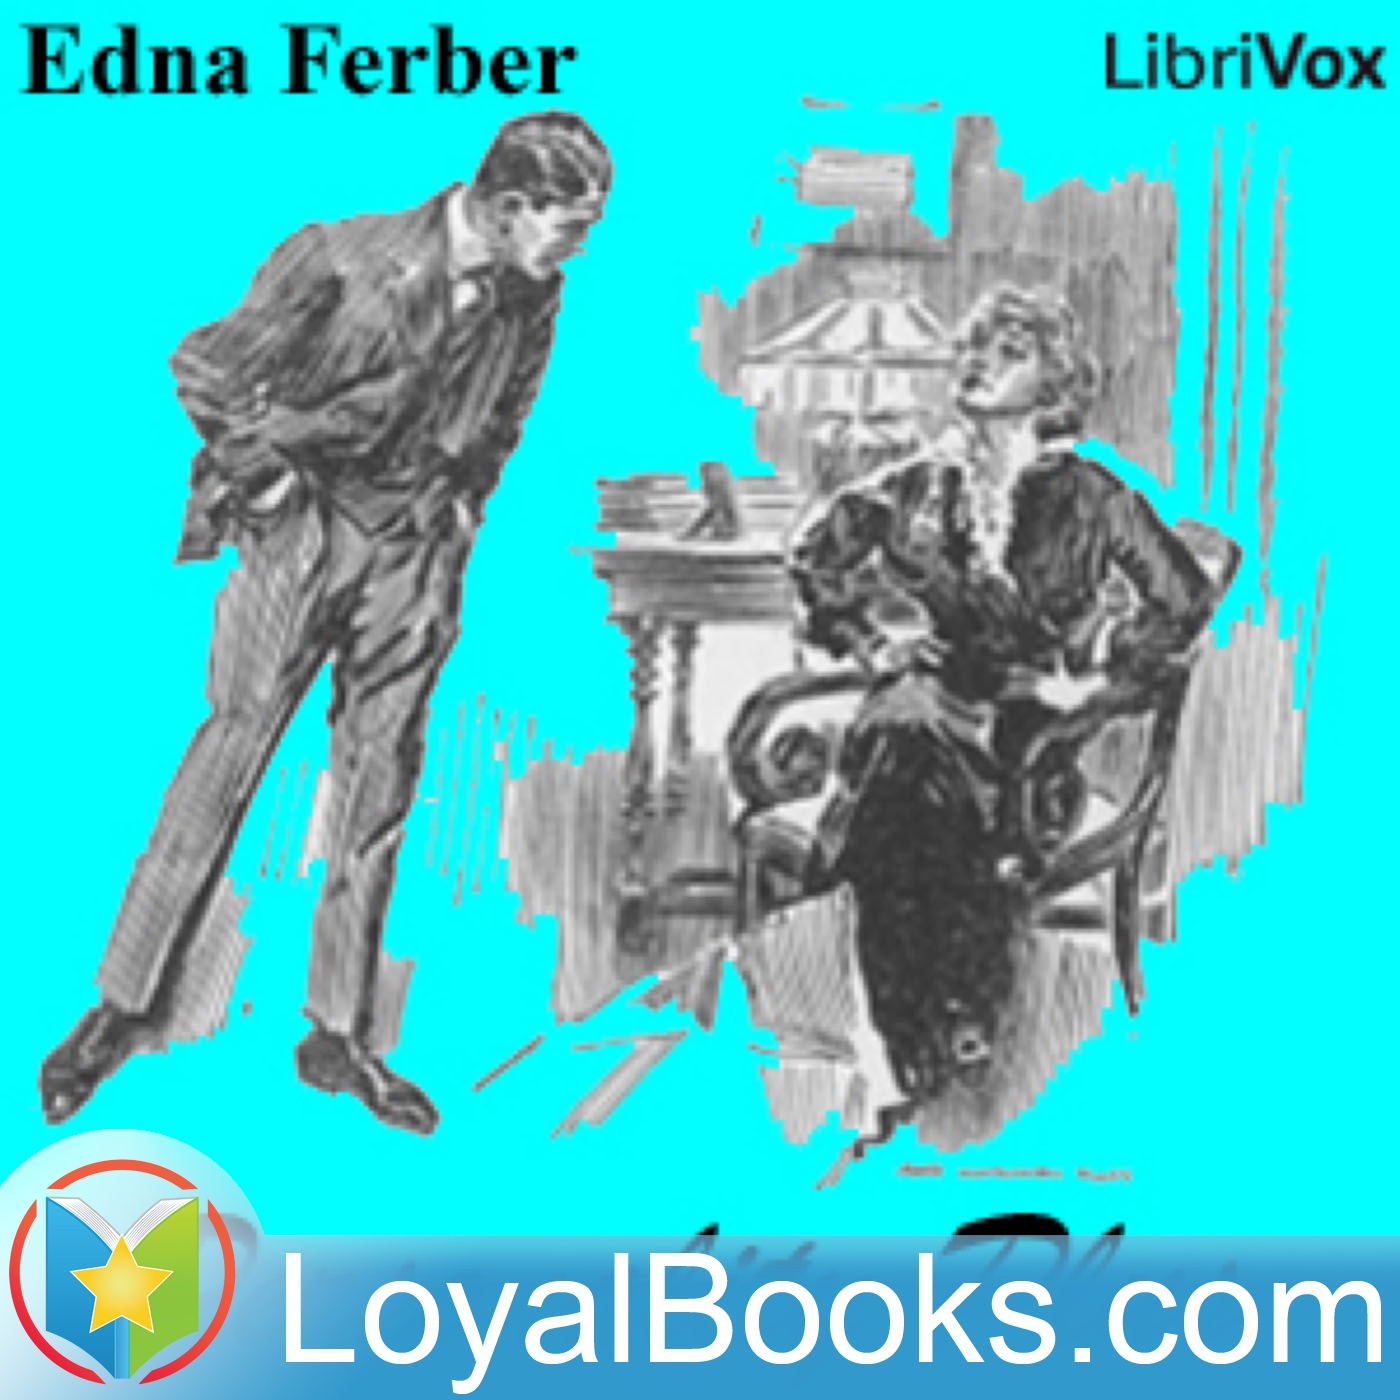 Personality Plus by Edna Ferber